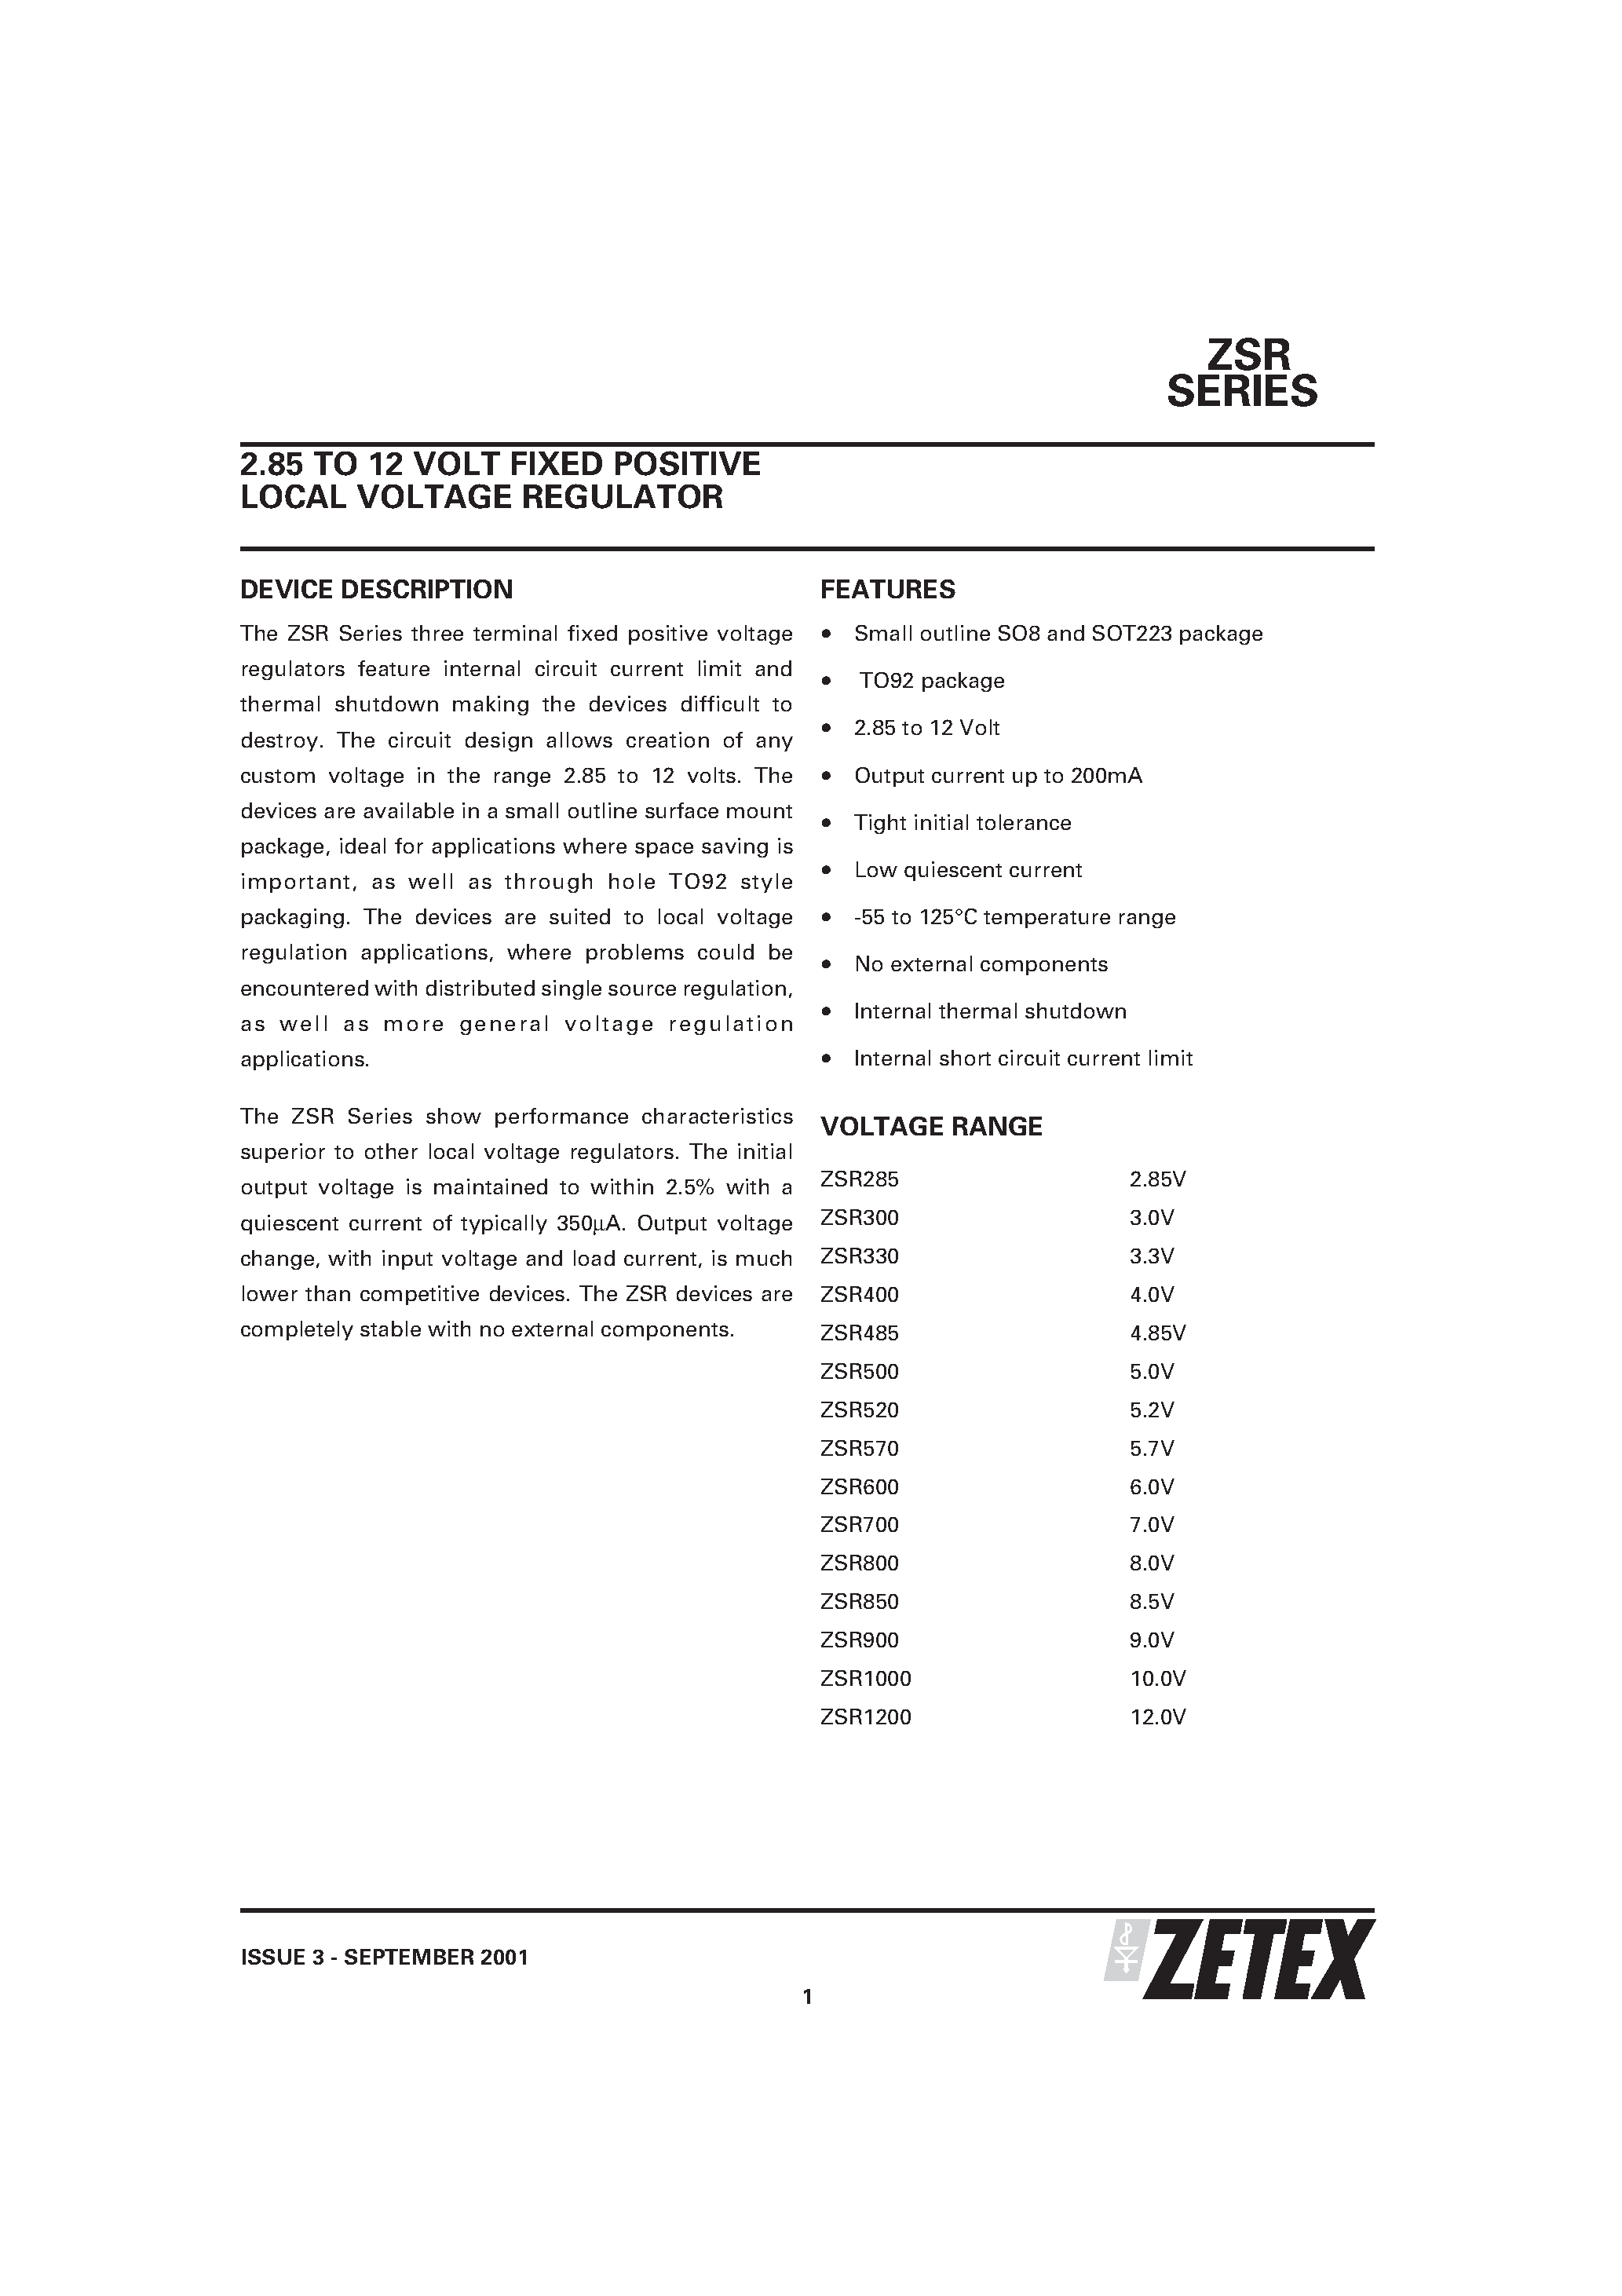 Datasheet ZSR900G - 2.85 TO 12 VOLT FIXED POSITIVE LOCAL VOLTAGE REGULATOR page 1